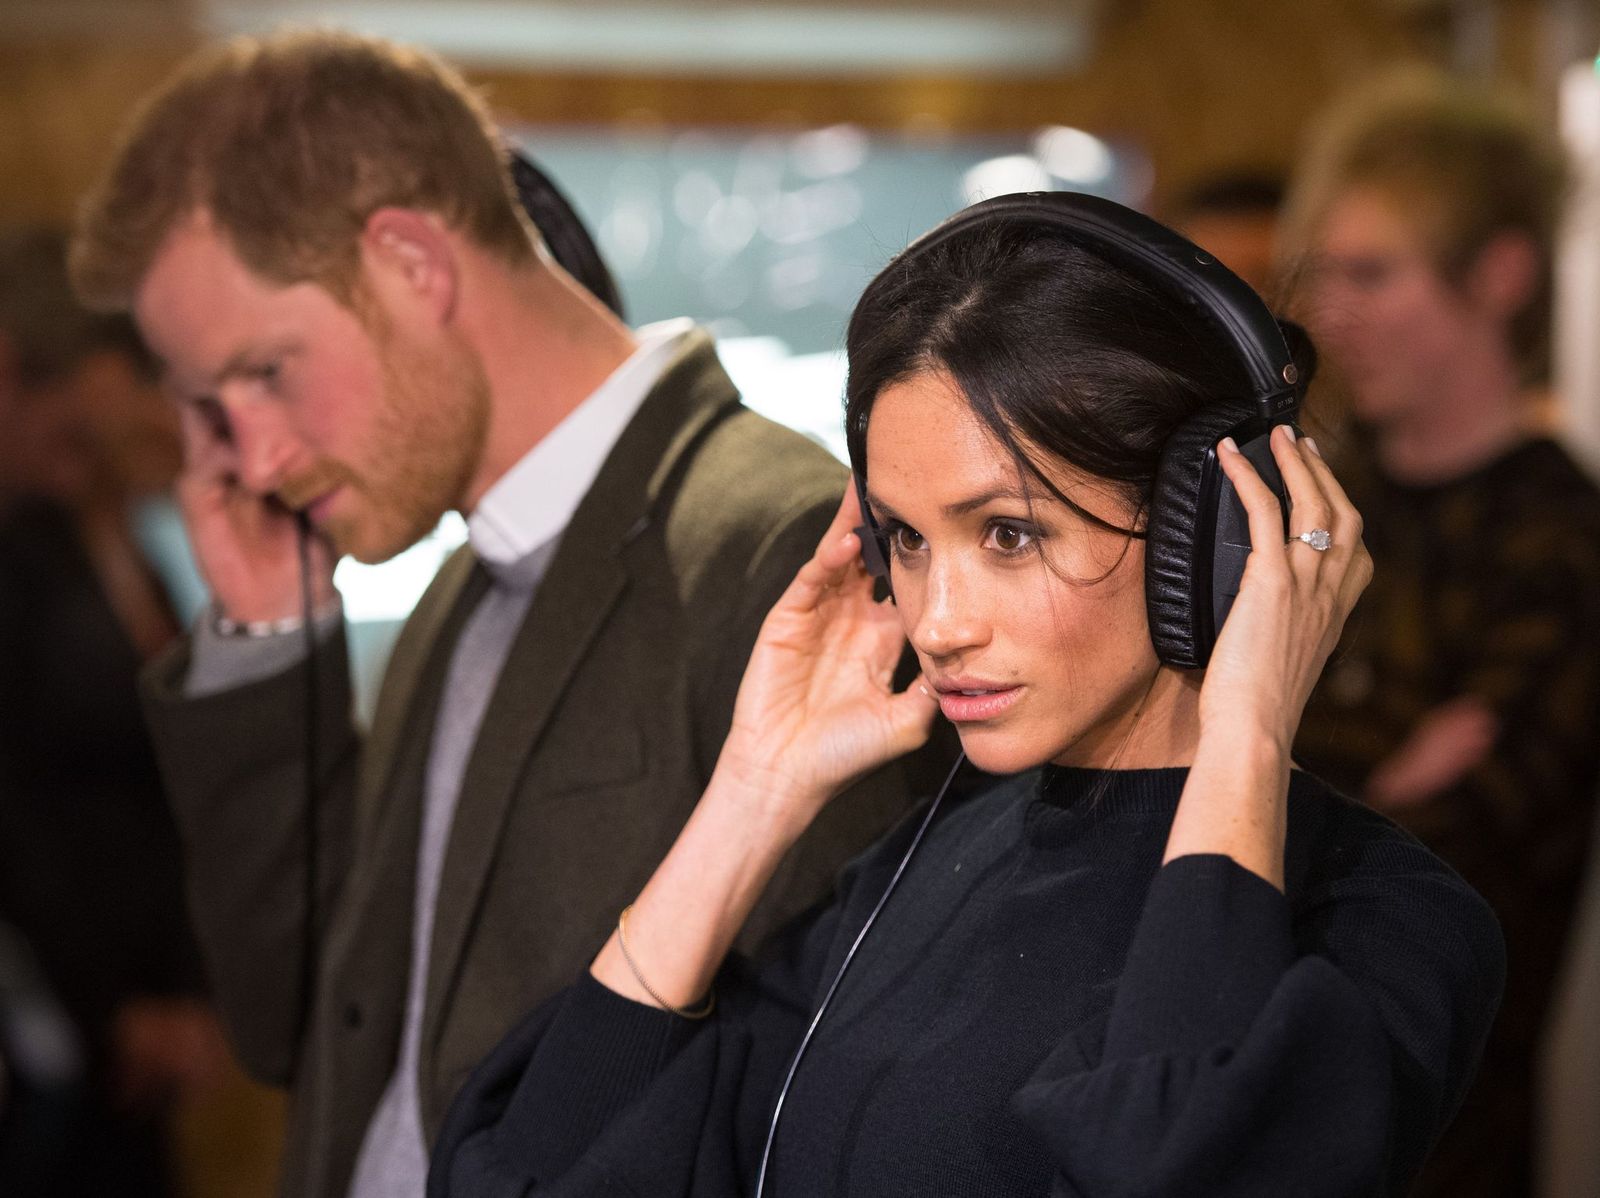 Prince Harry and Meghan Markle listen to a broadcast at Reprezent 107.3FM in Pop Brixton on January 9, 2018, in London, England | Photo: Dominic Lipinski - WPA Pool/Getty Images